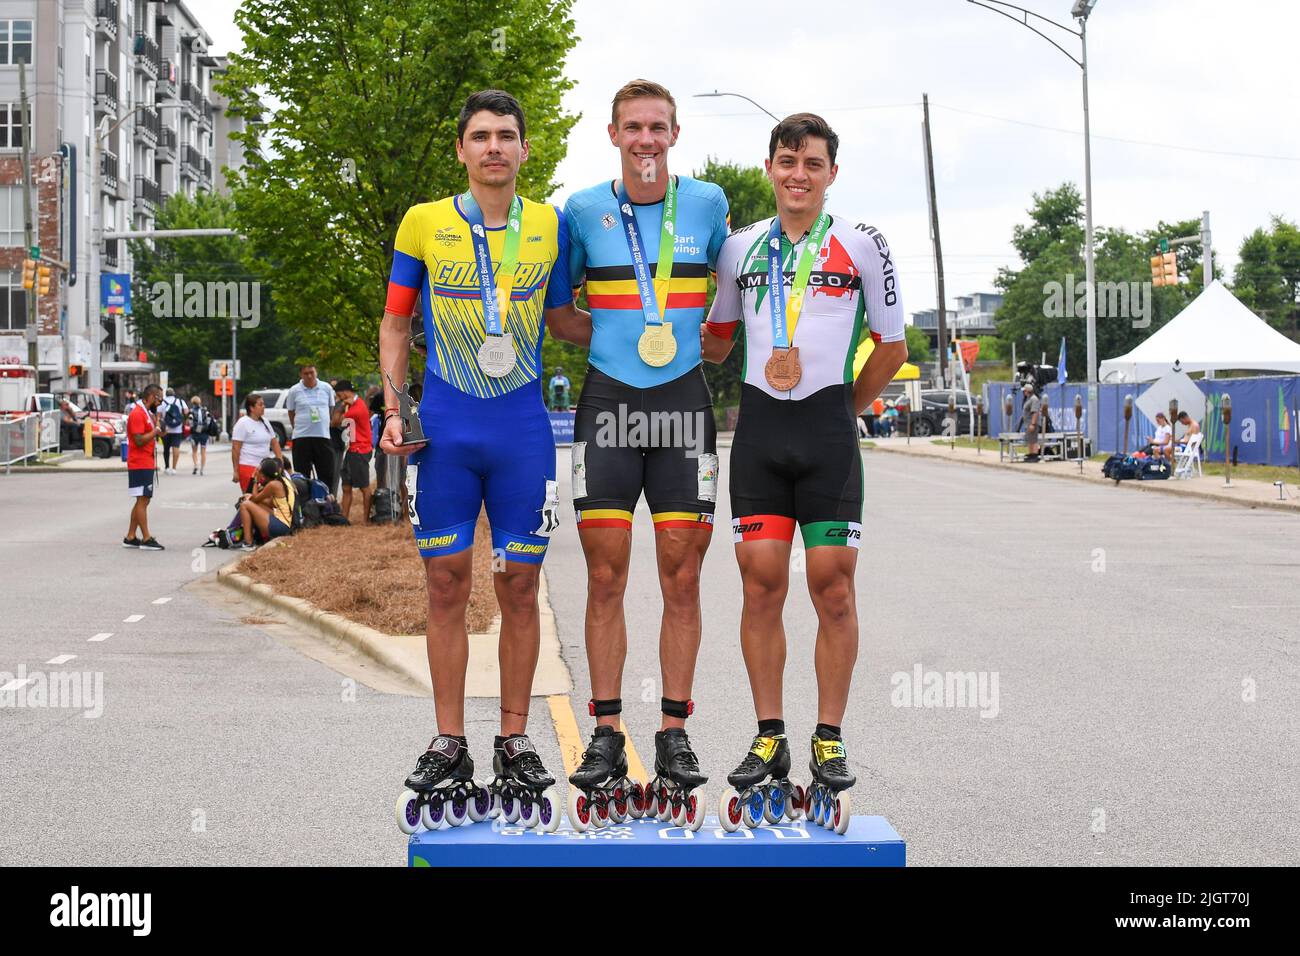 Birmingham, AL, USA. 10th July, 2022. The winners of the Men's 10,000M Speed Skating (Road) event are from left to right; Daniel ZAPATA MARTINEZ of Colombia (Silver Medal), Bart Rene SWINGS of Belgium (Gold Medal), and Mike Alejandro PAEZ CUELLAR of Mexico (Bronze medal), at The World Games 2022 on July 10, 2022 at Powell Avenue Steam Plant in Birmingham, AL. Photo by Kevin Langley/CSM/Alamy Live News Stock Photo